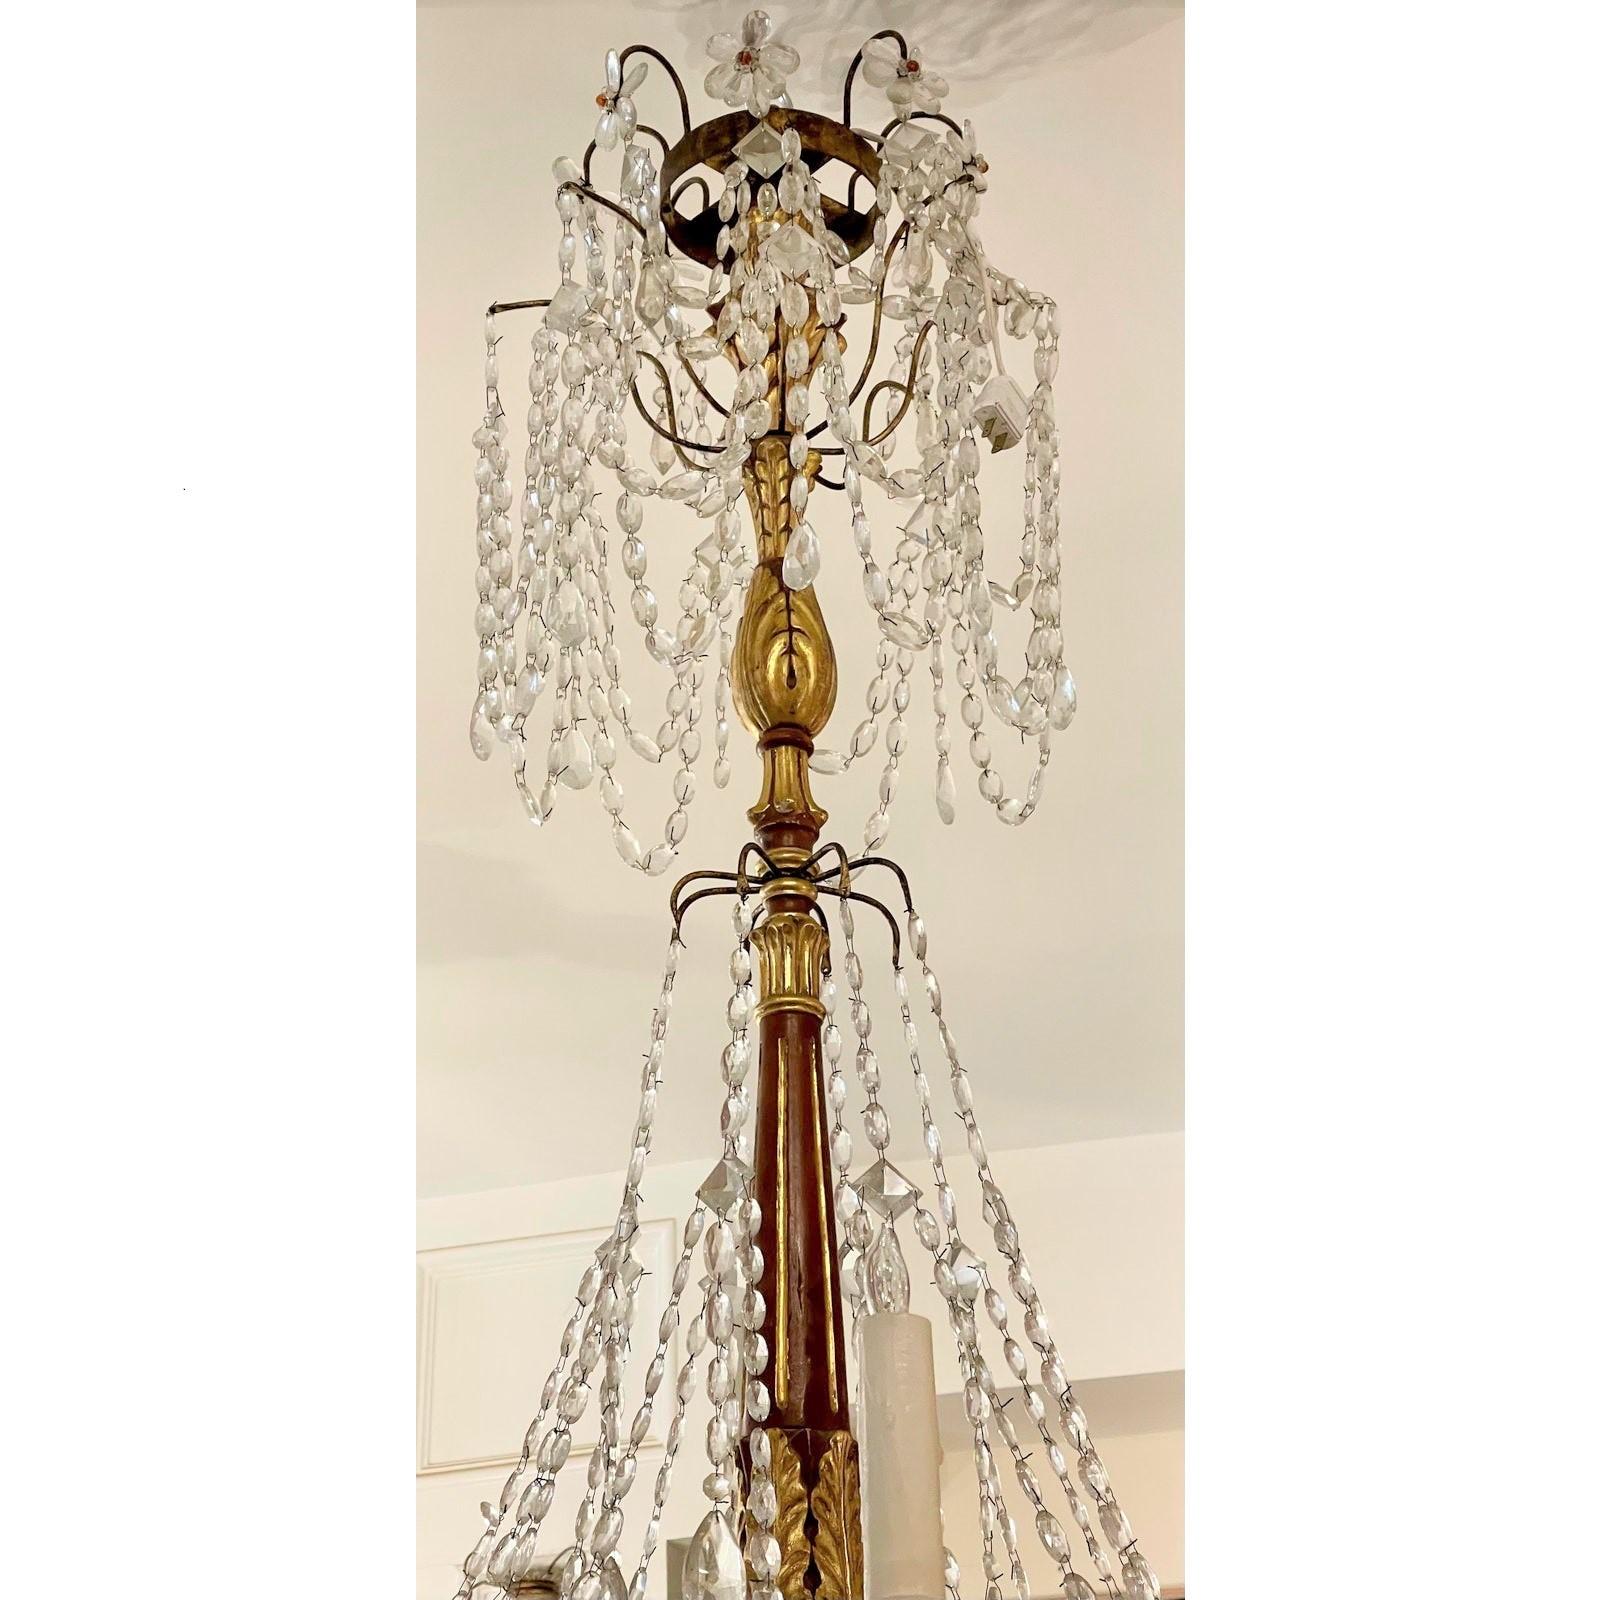 Louis XVI Monumental Antique Italian Giltwood Chandelier, Therien Collection